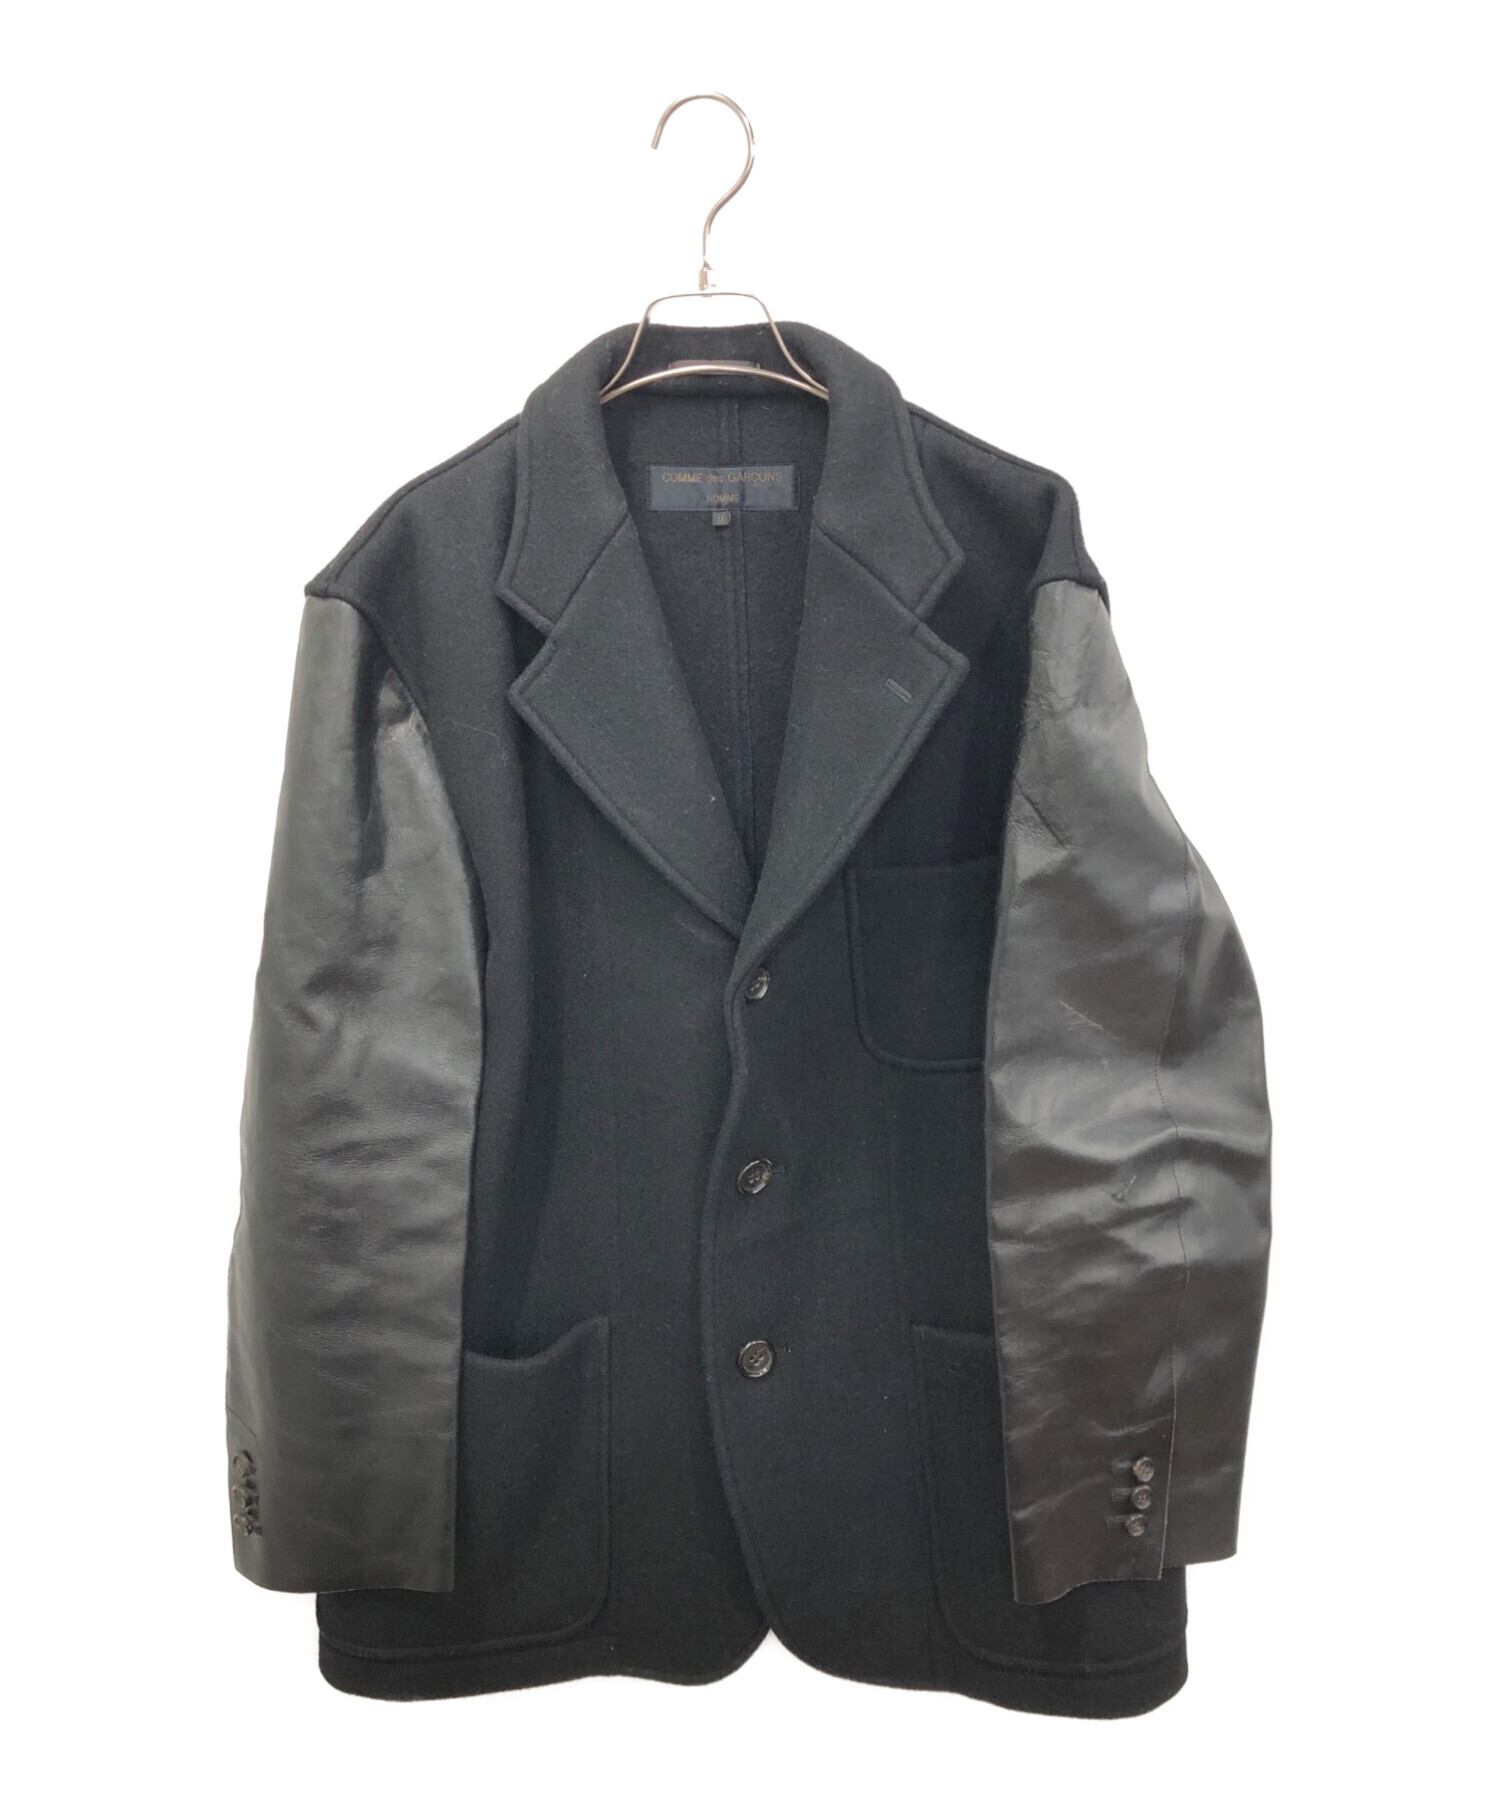 54cmCOMME des GARCONS HOMME レザー切り替え　ジャケット